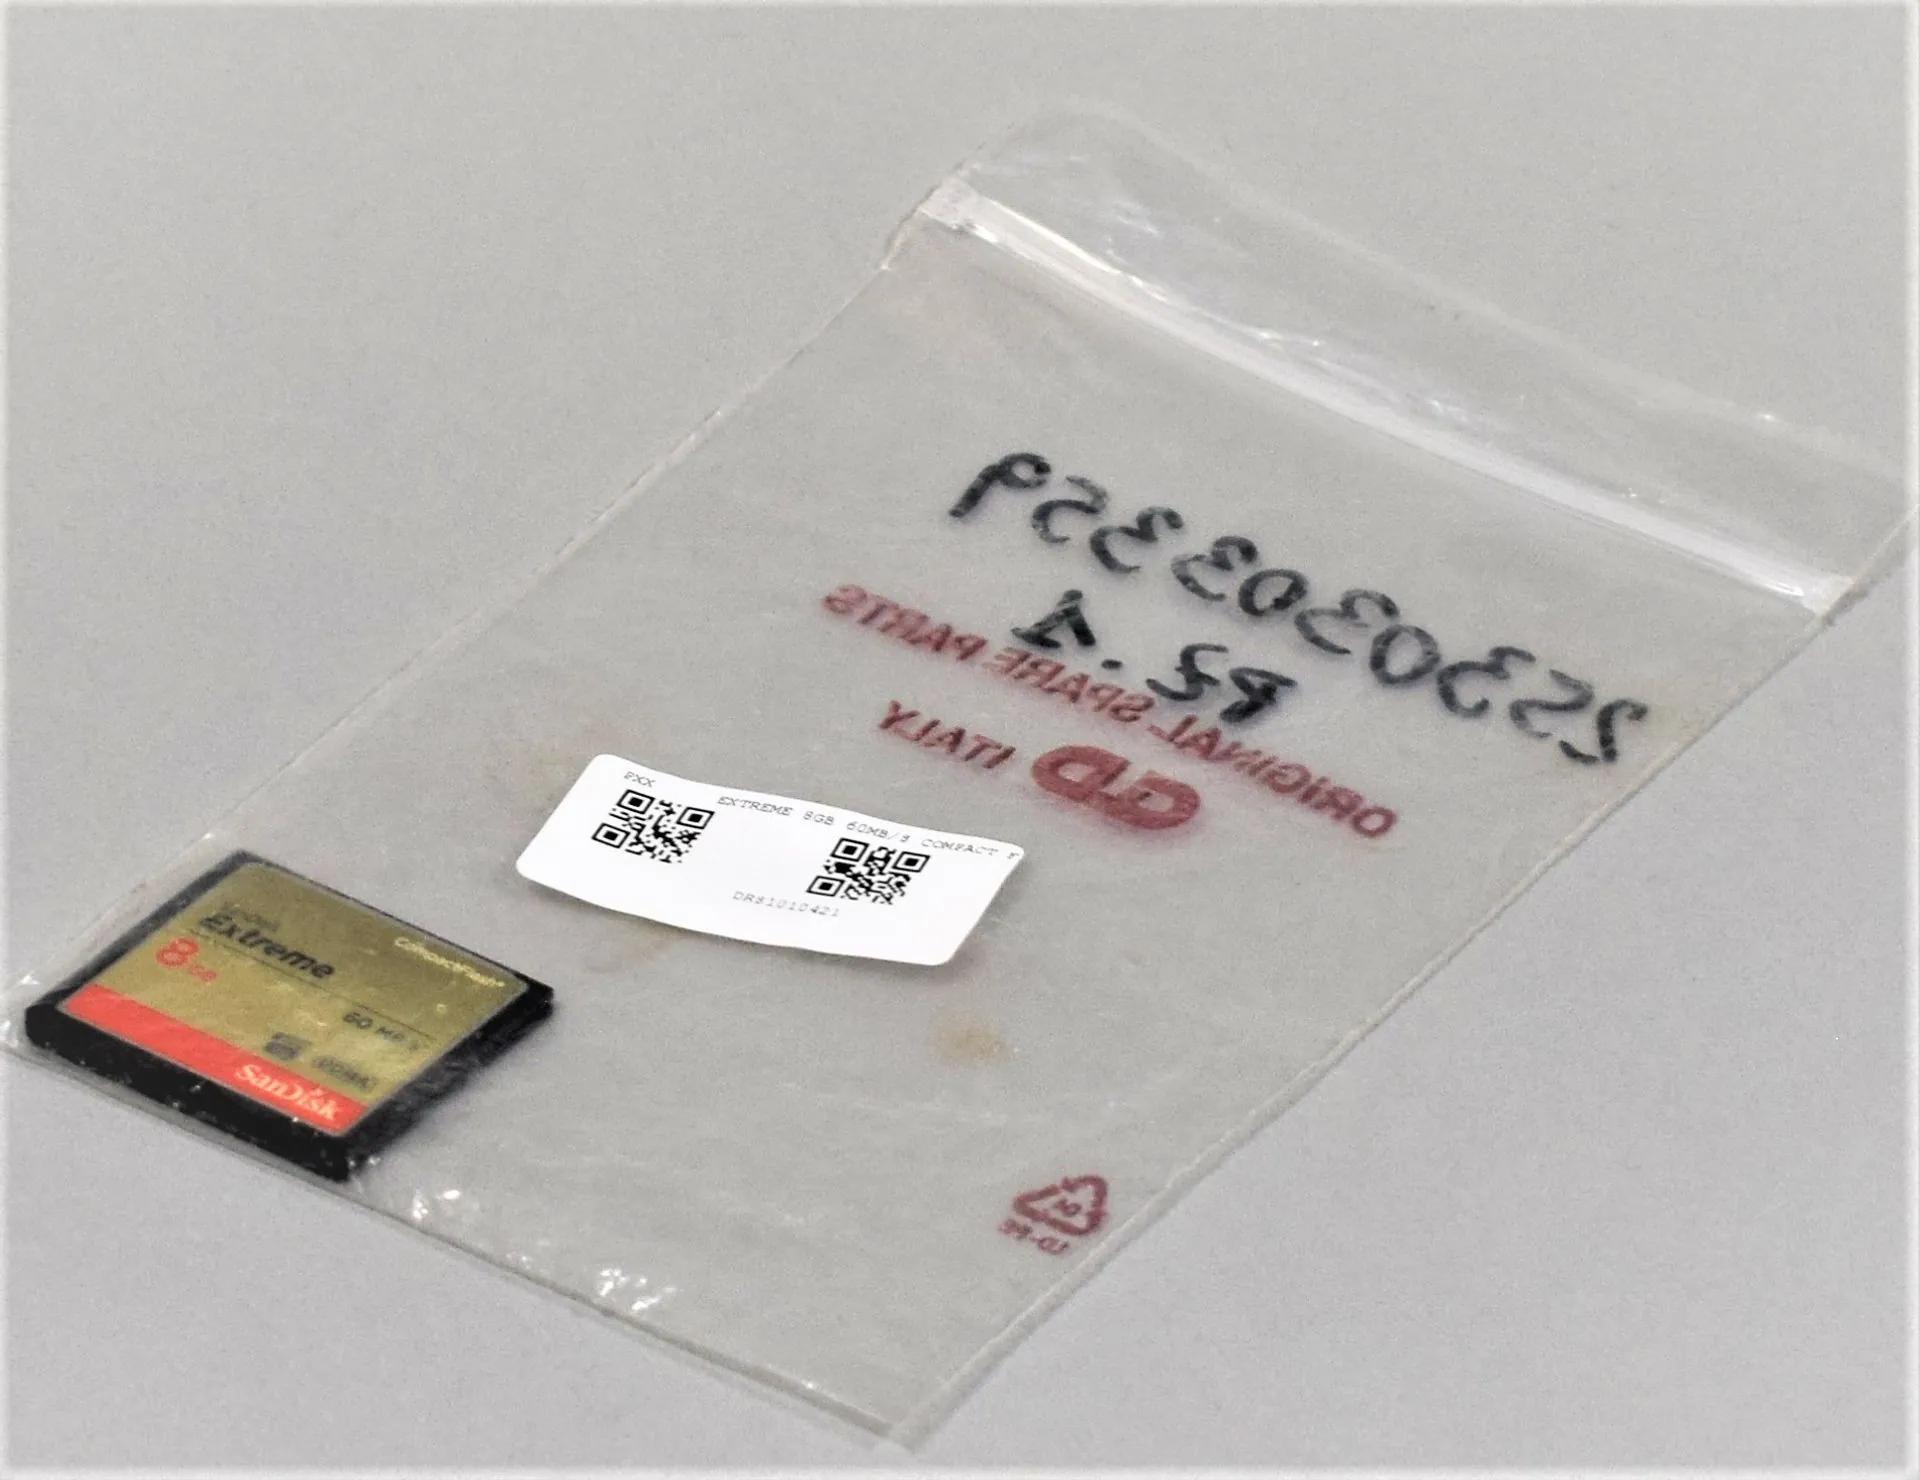 EXTREME 8GB 60MB/S COMPACT FLASH